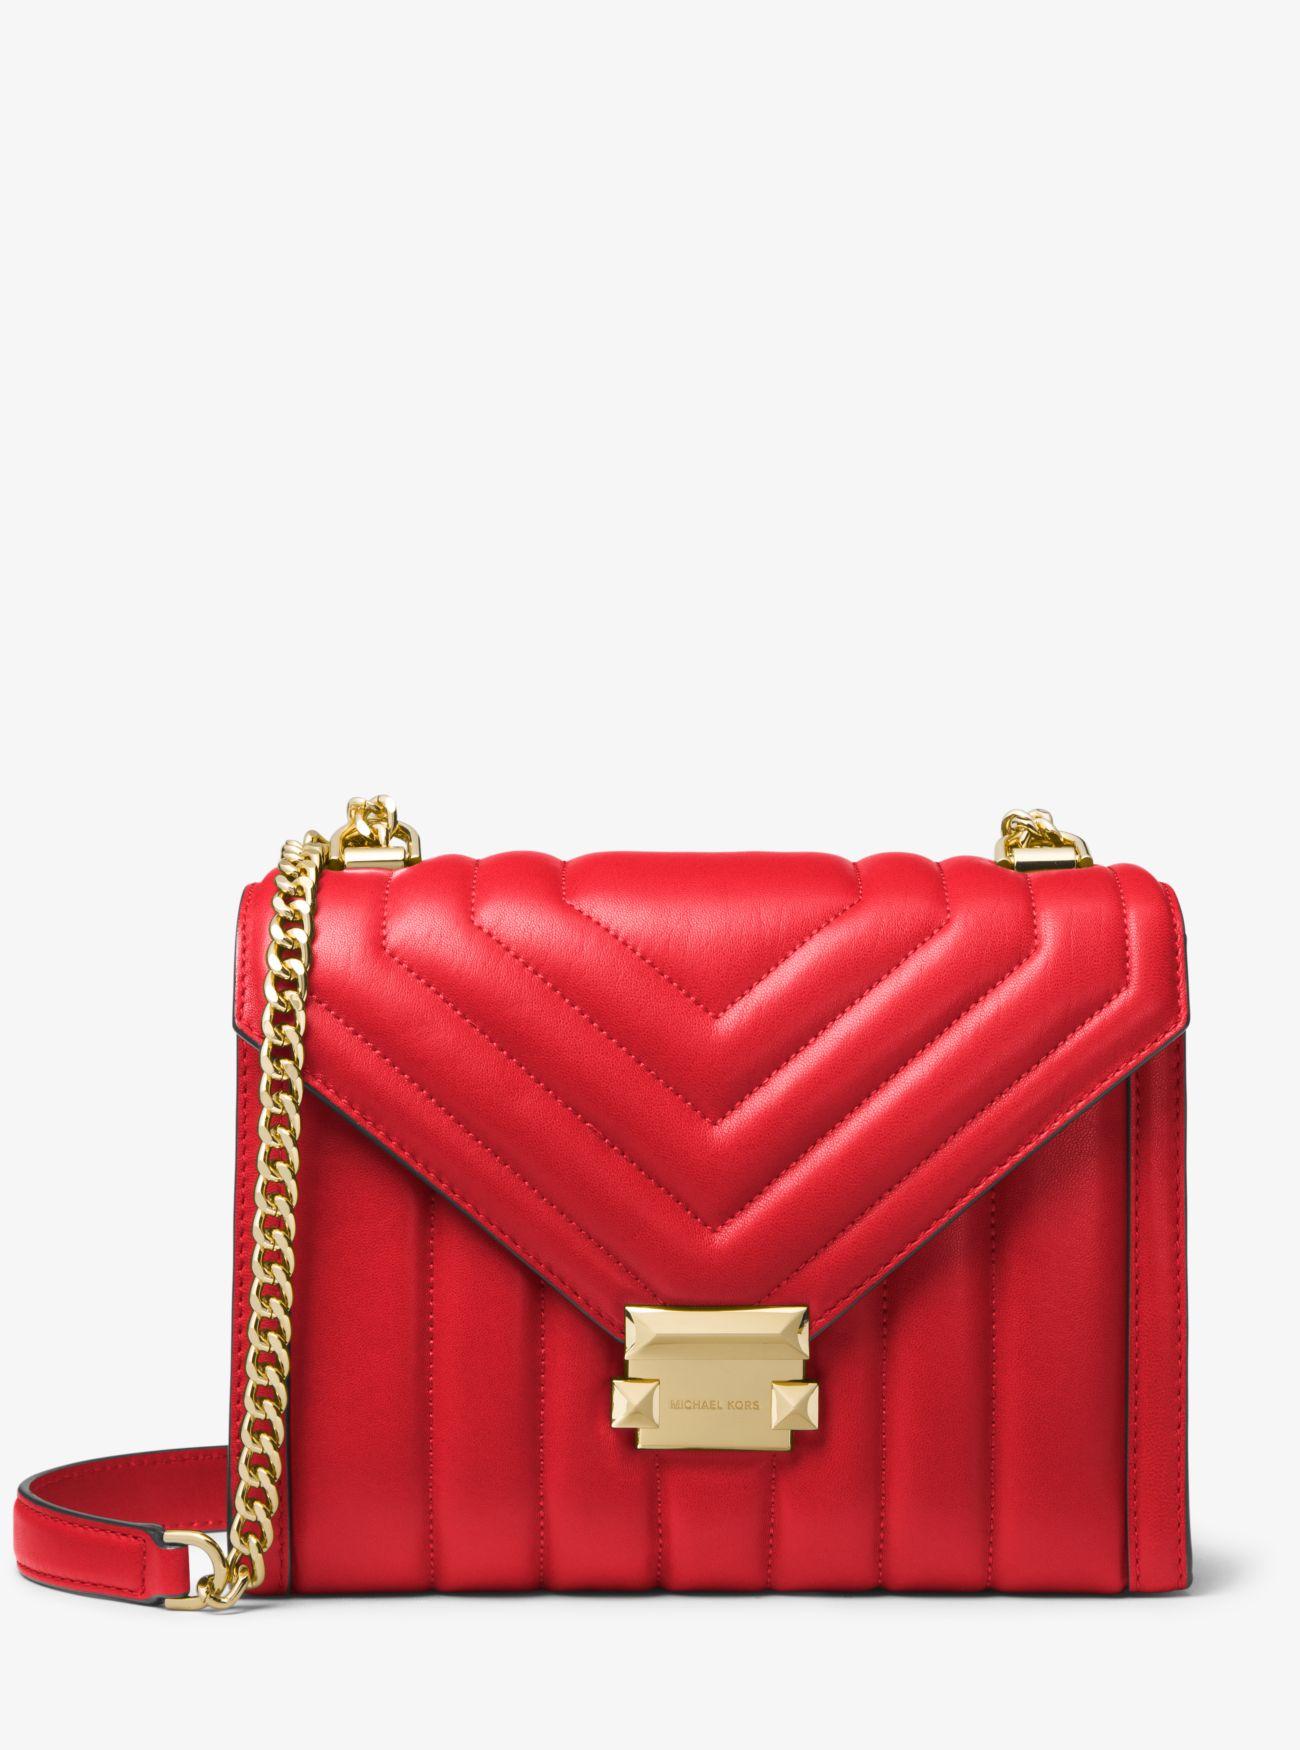 Michael Kors Whitney Large Quilted Leather Convertible Shoulder Bag in Red - Lyst